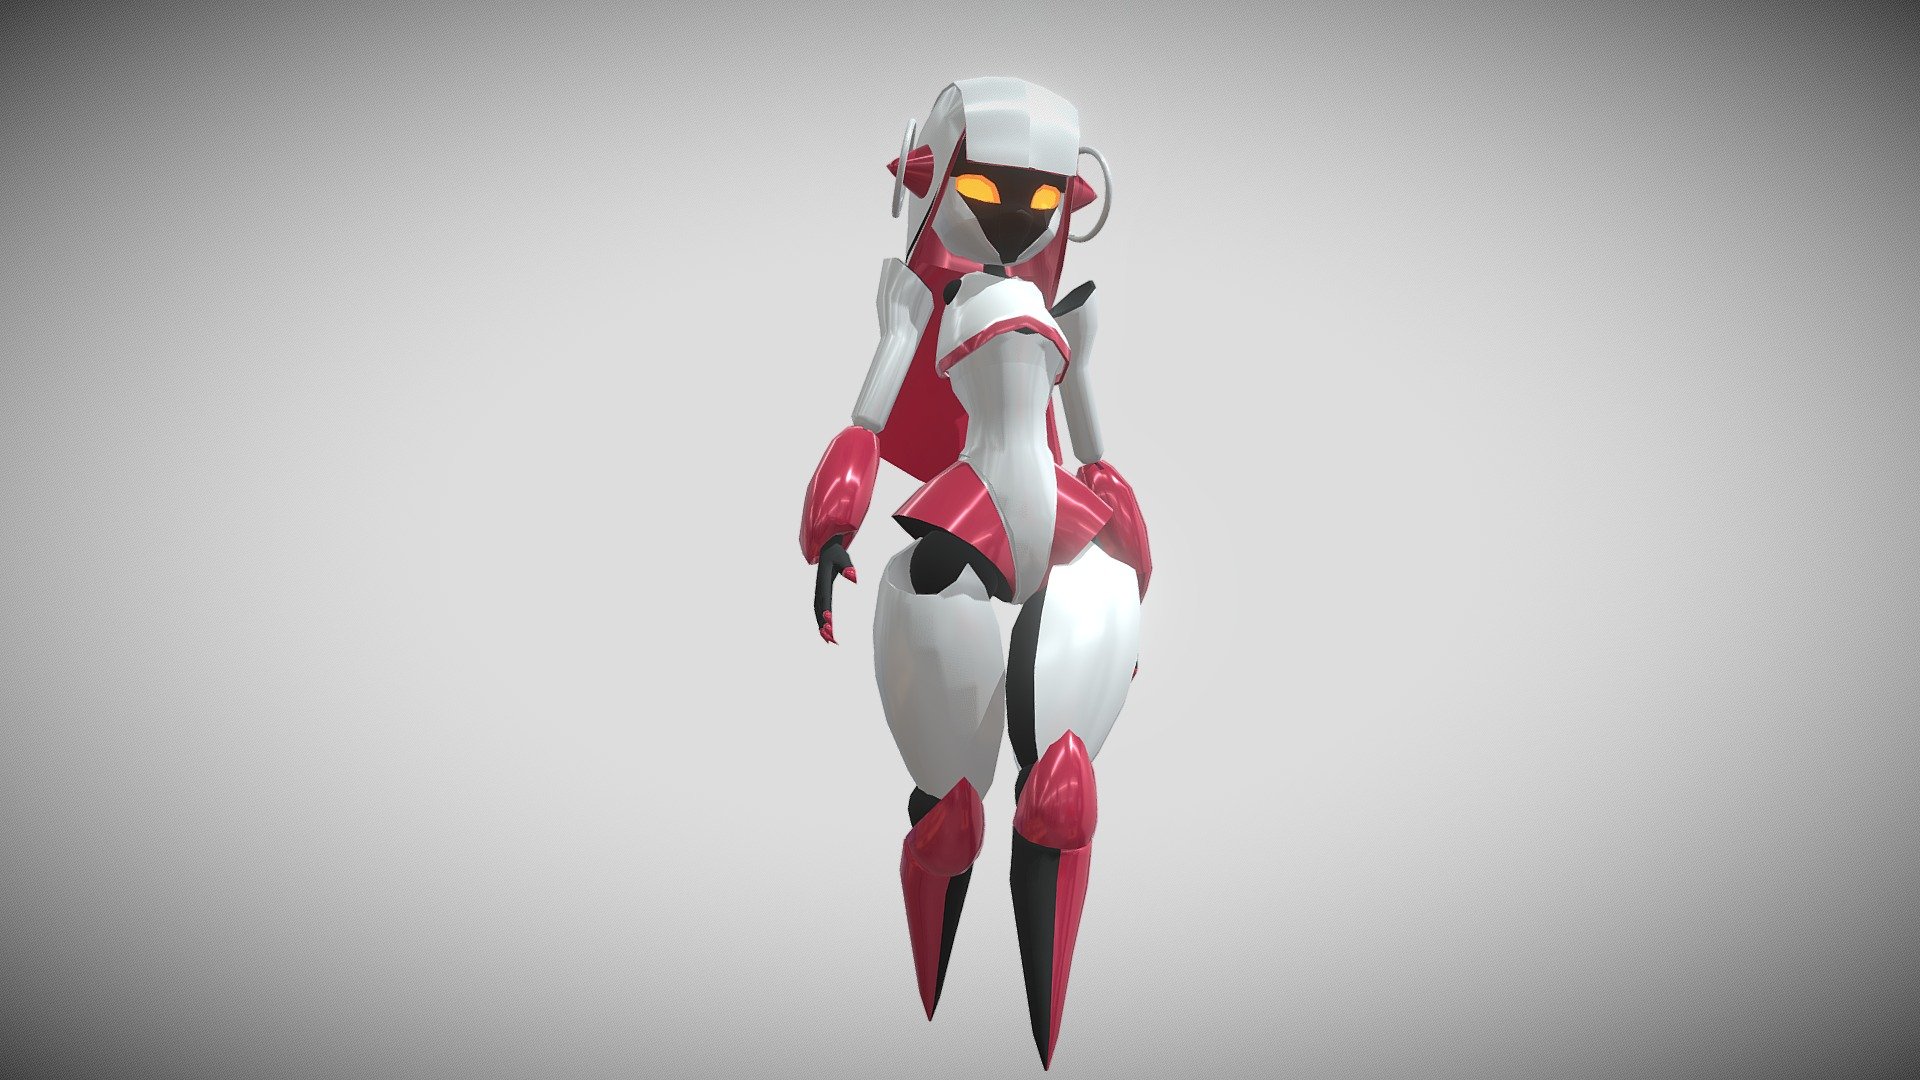 Evellyn's Hidden Heroes avatar from episodes 7 and 8 of Meta Runner season 2.
Thought it was annoying that you can't find much of the show's concept art and decided to make something of my own 3d model